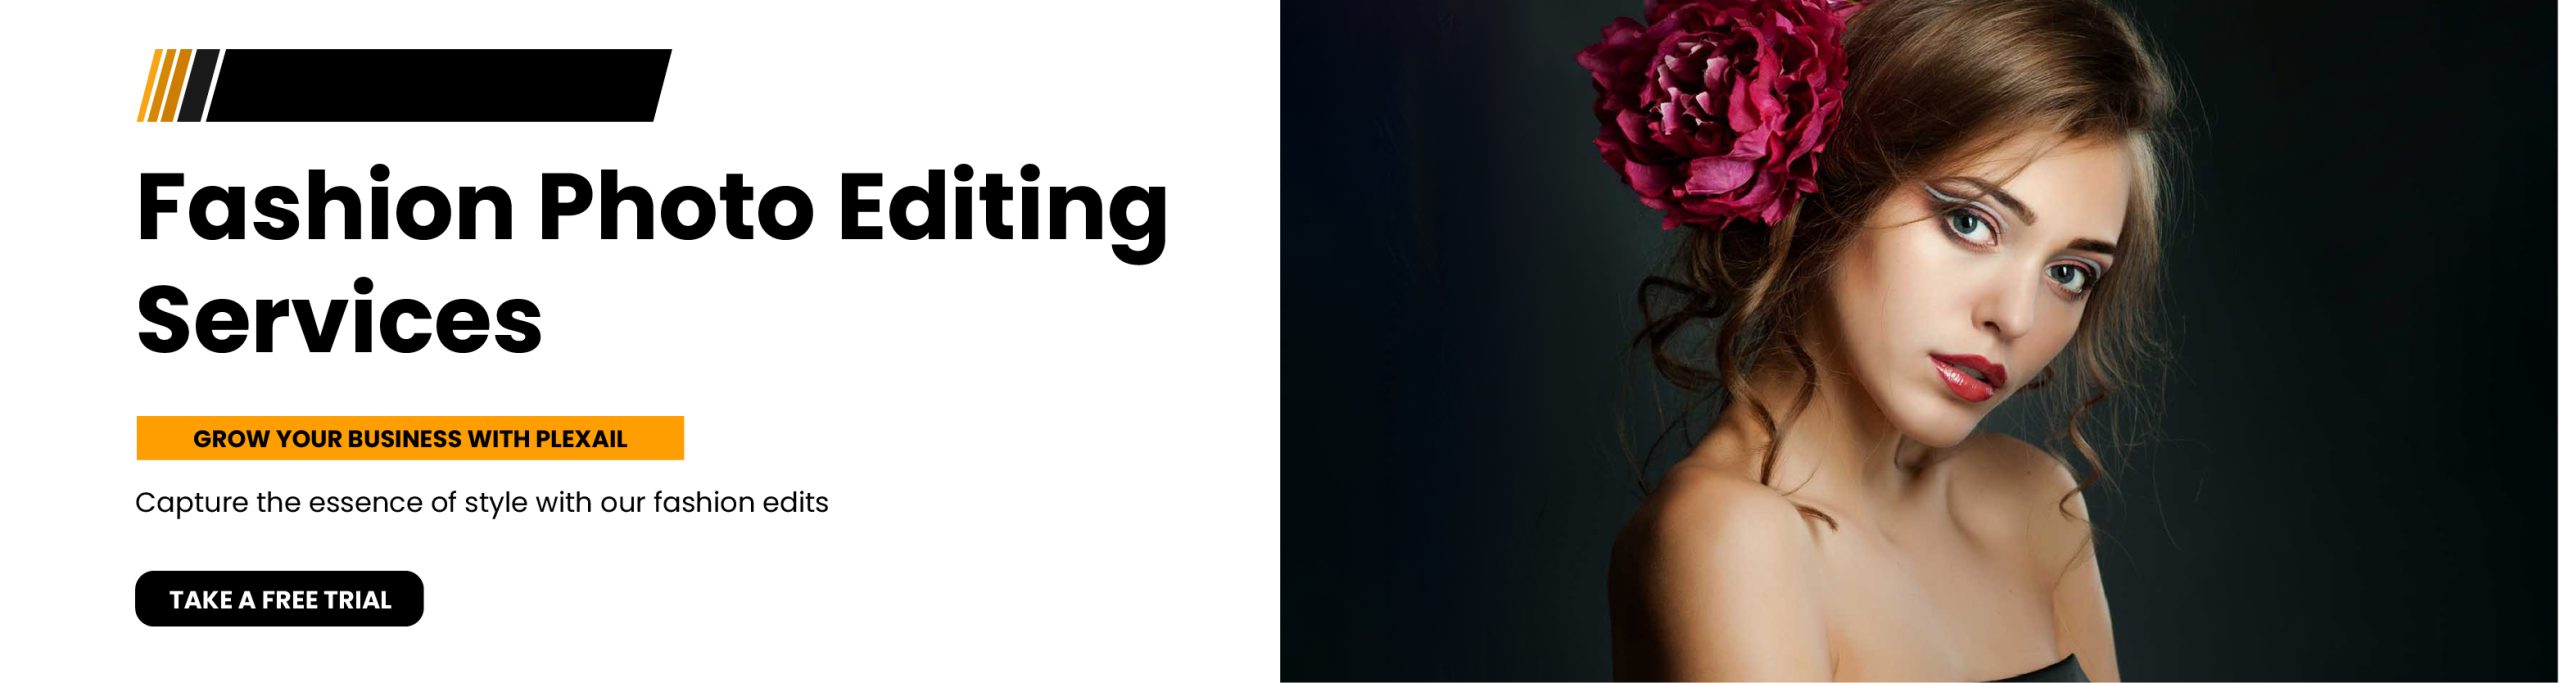 fashion photo editing services online in usa